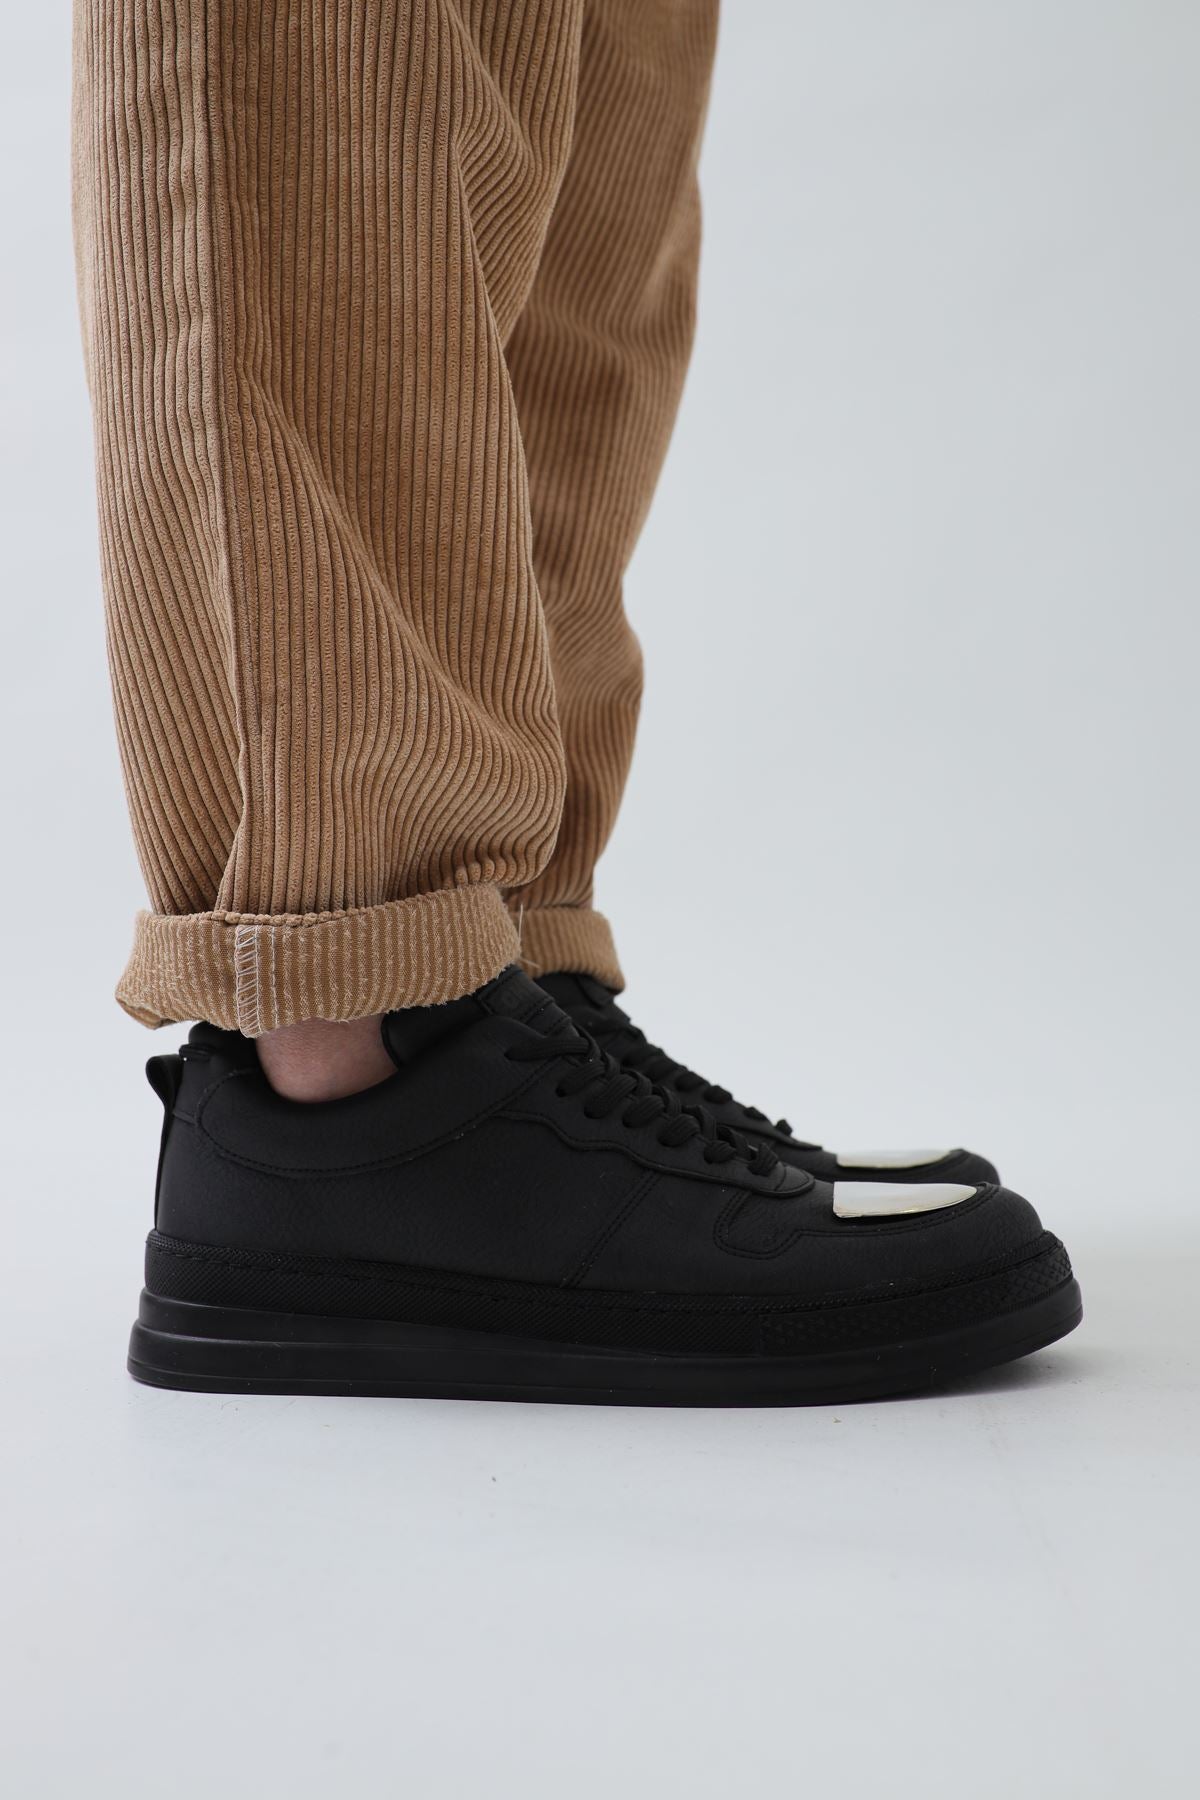 CH185 ST Men's Shoes BLACK - STREETMODE ™